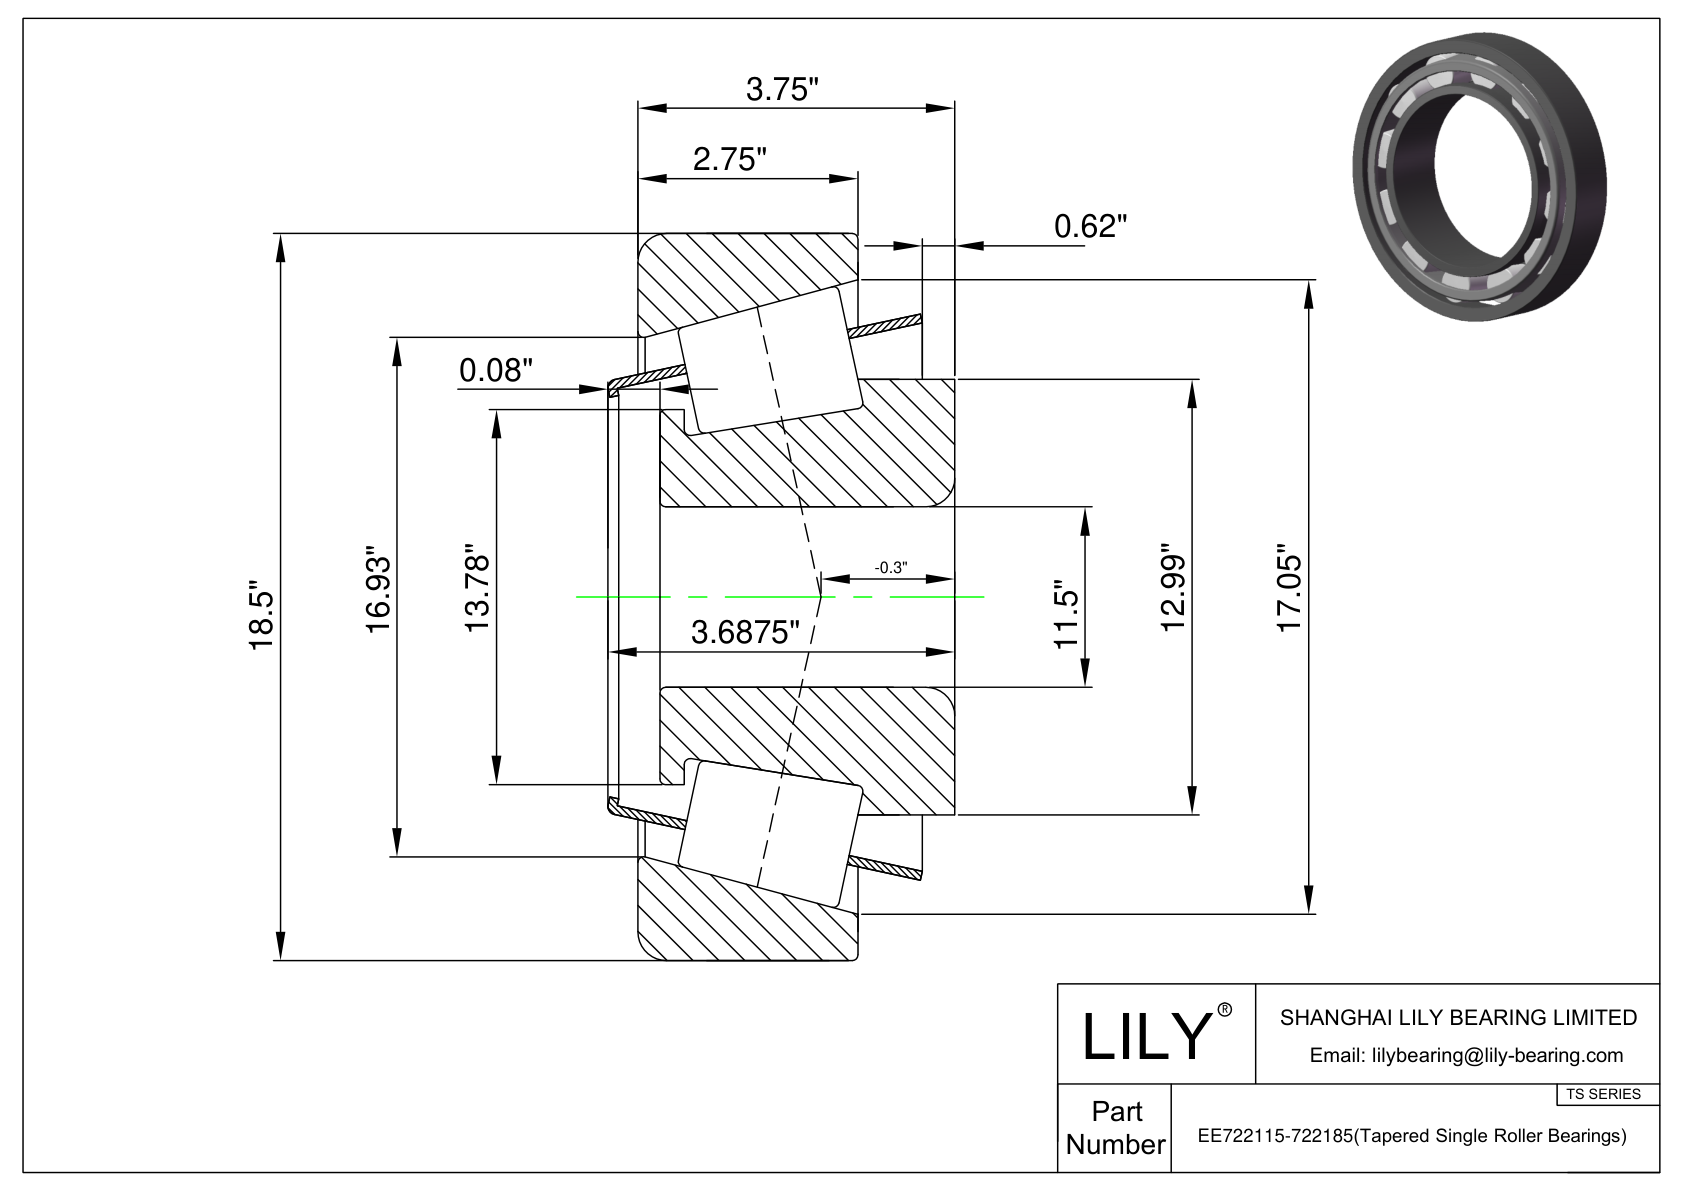 EE722115-722185 TS (Tapered Single Roller Bearings) (Imperial) cad drawing